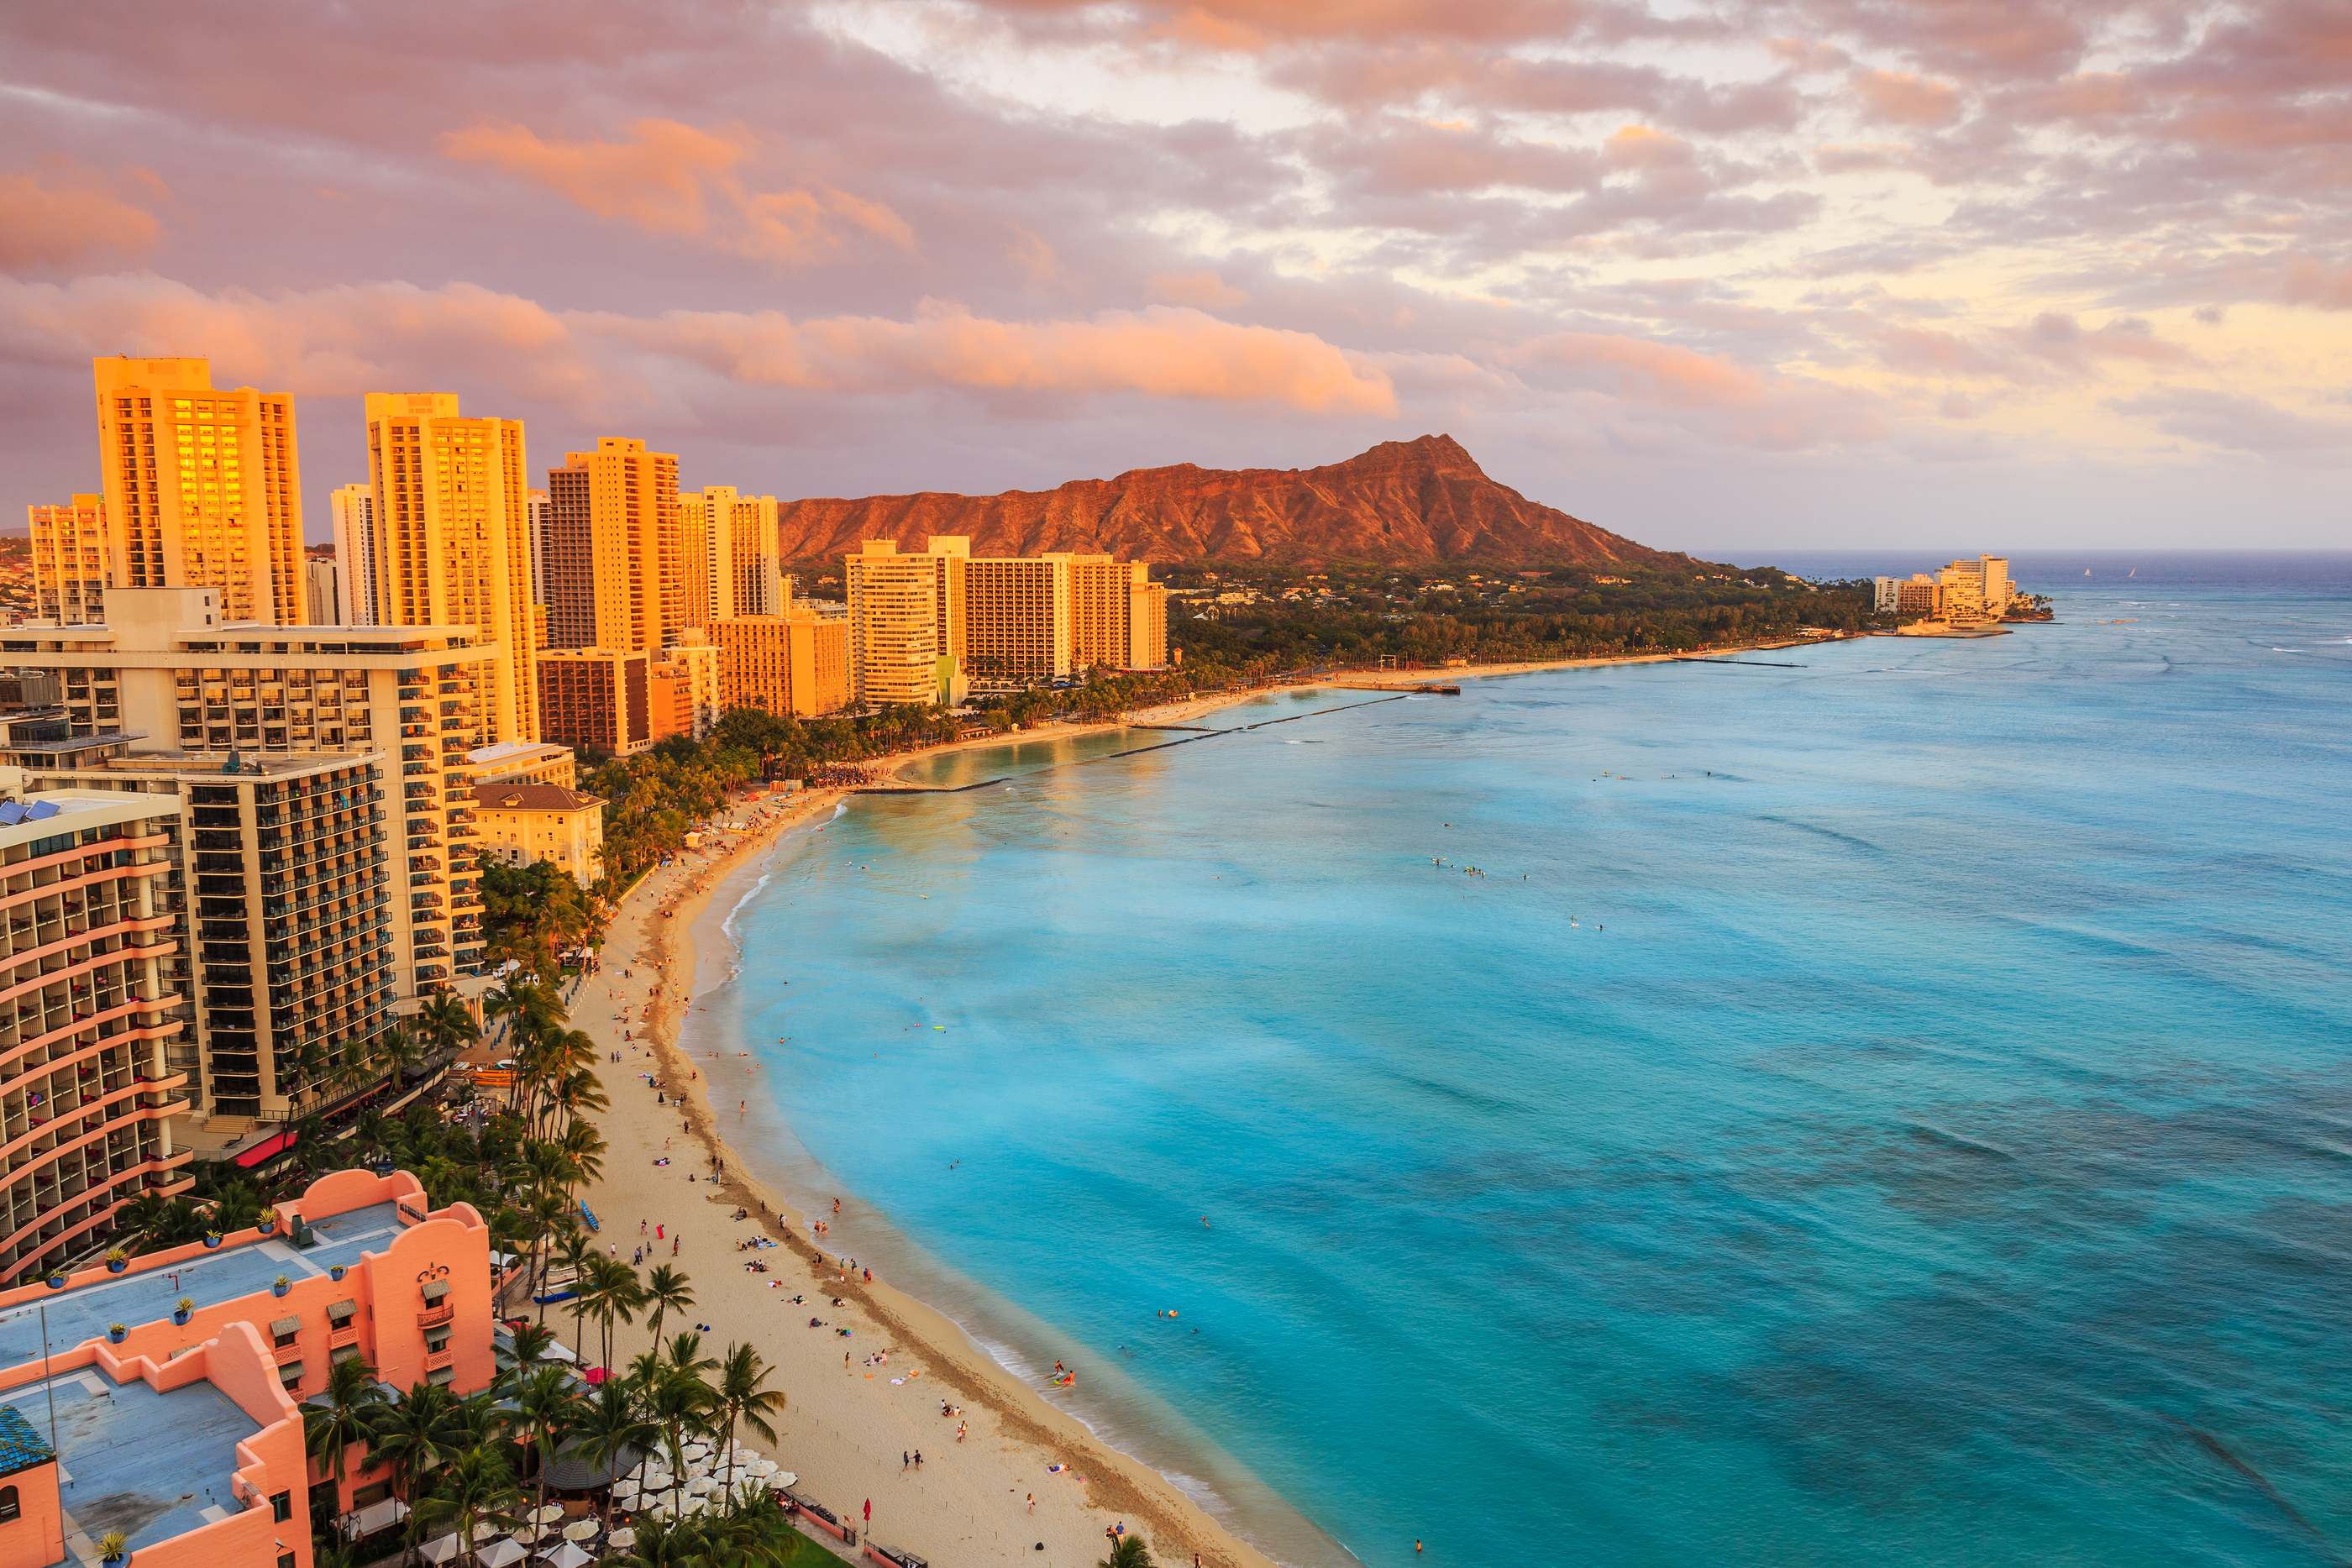 a beach with buildings and a body of water with Diamond Head in the background